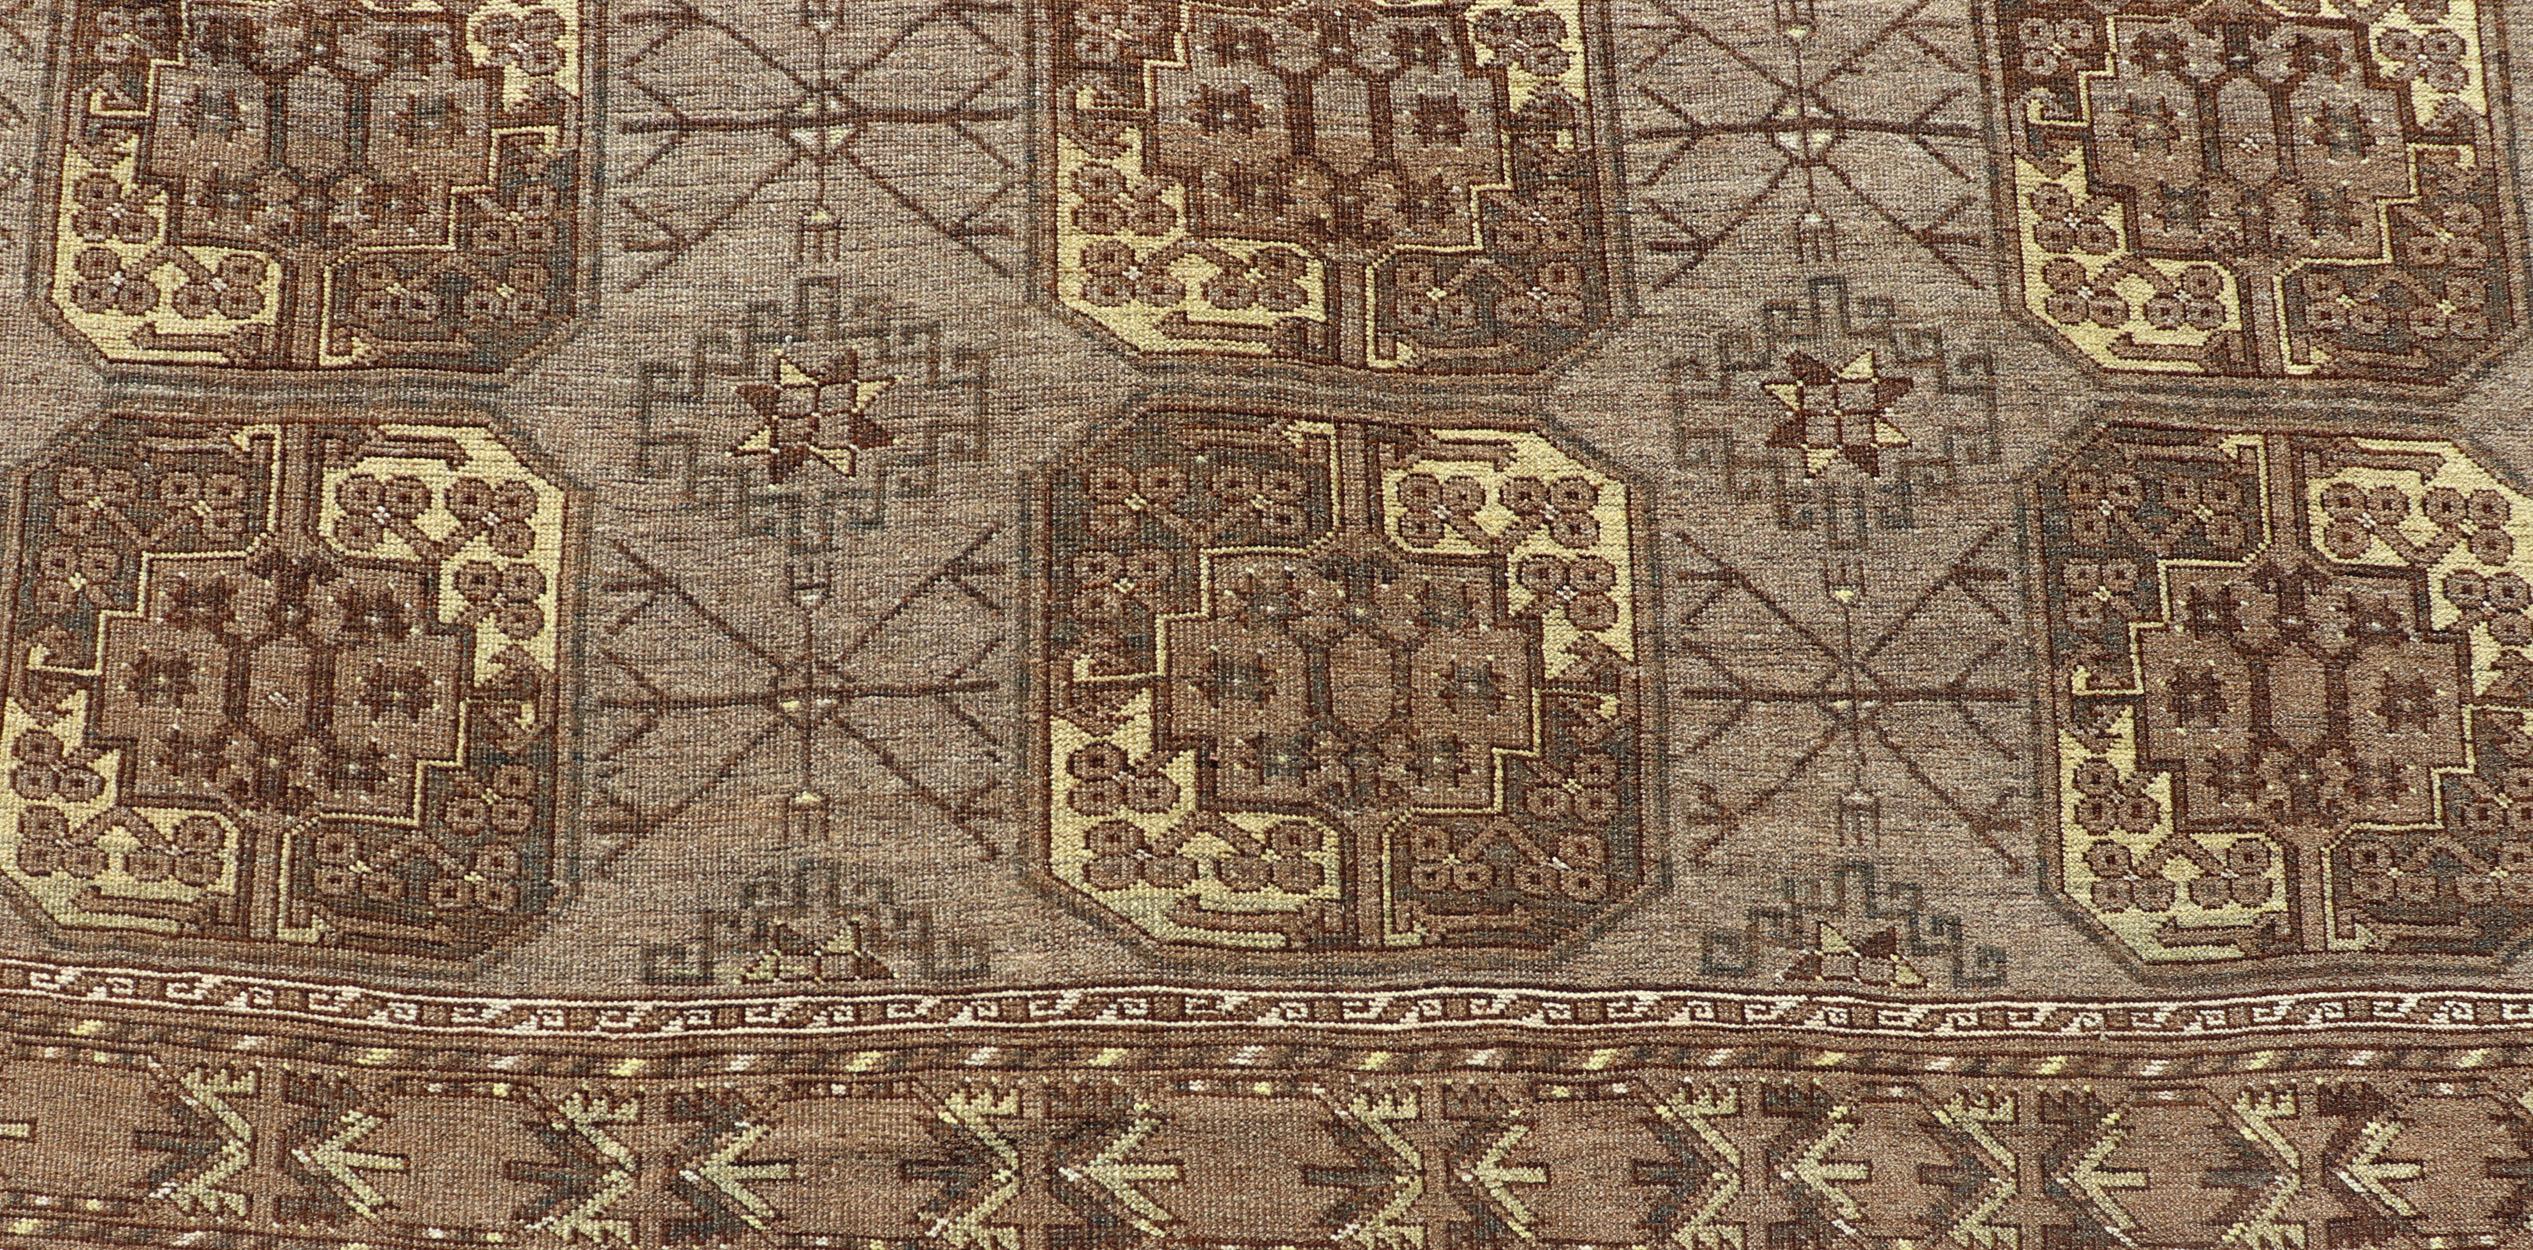 Hand-Knotted Turkomen Ersari Rug in Wool with Repeating Sub-Geometric Gul Design For Sale 6